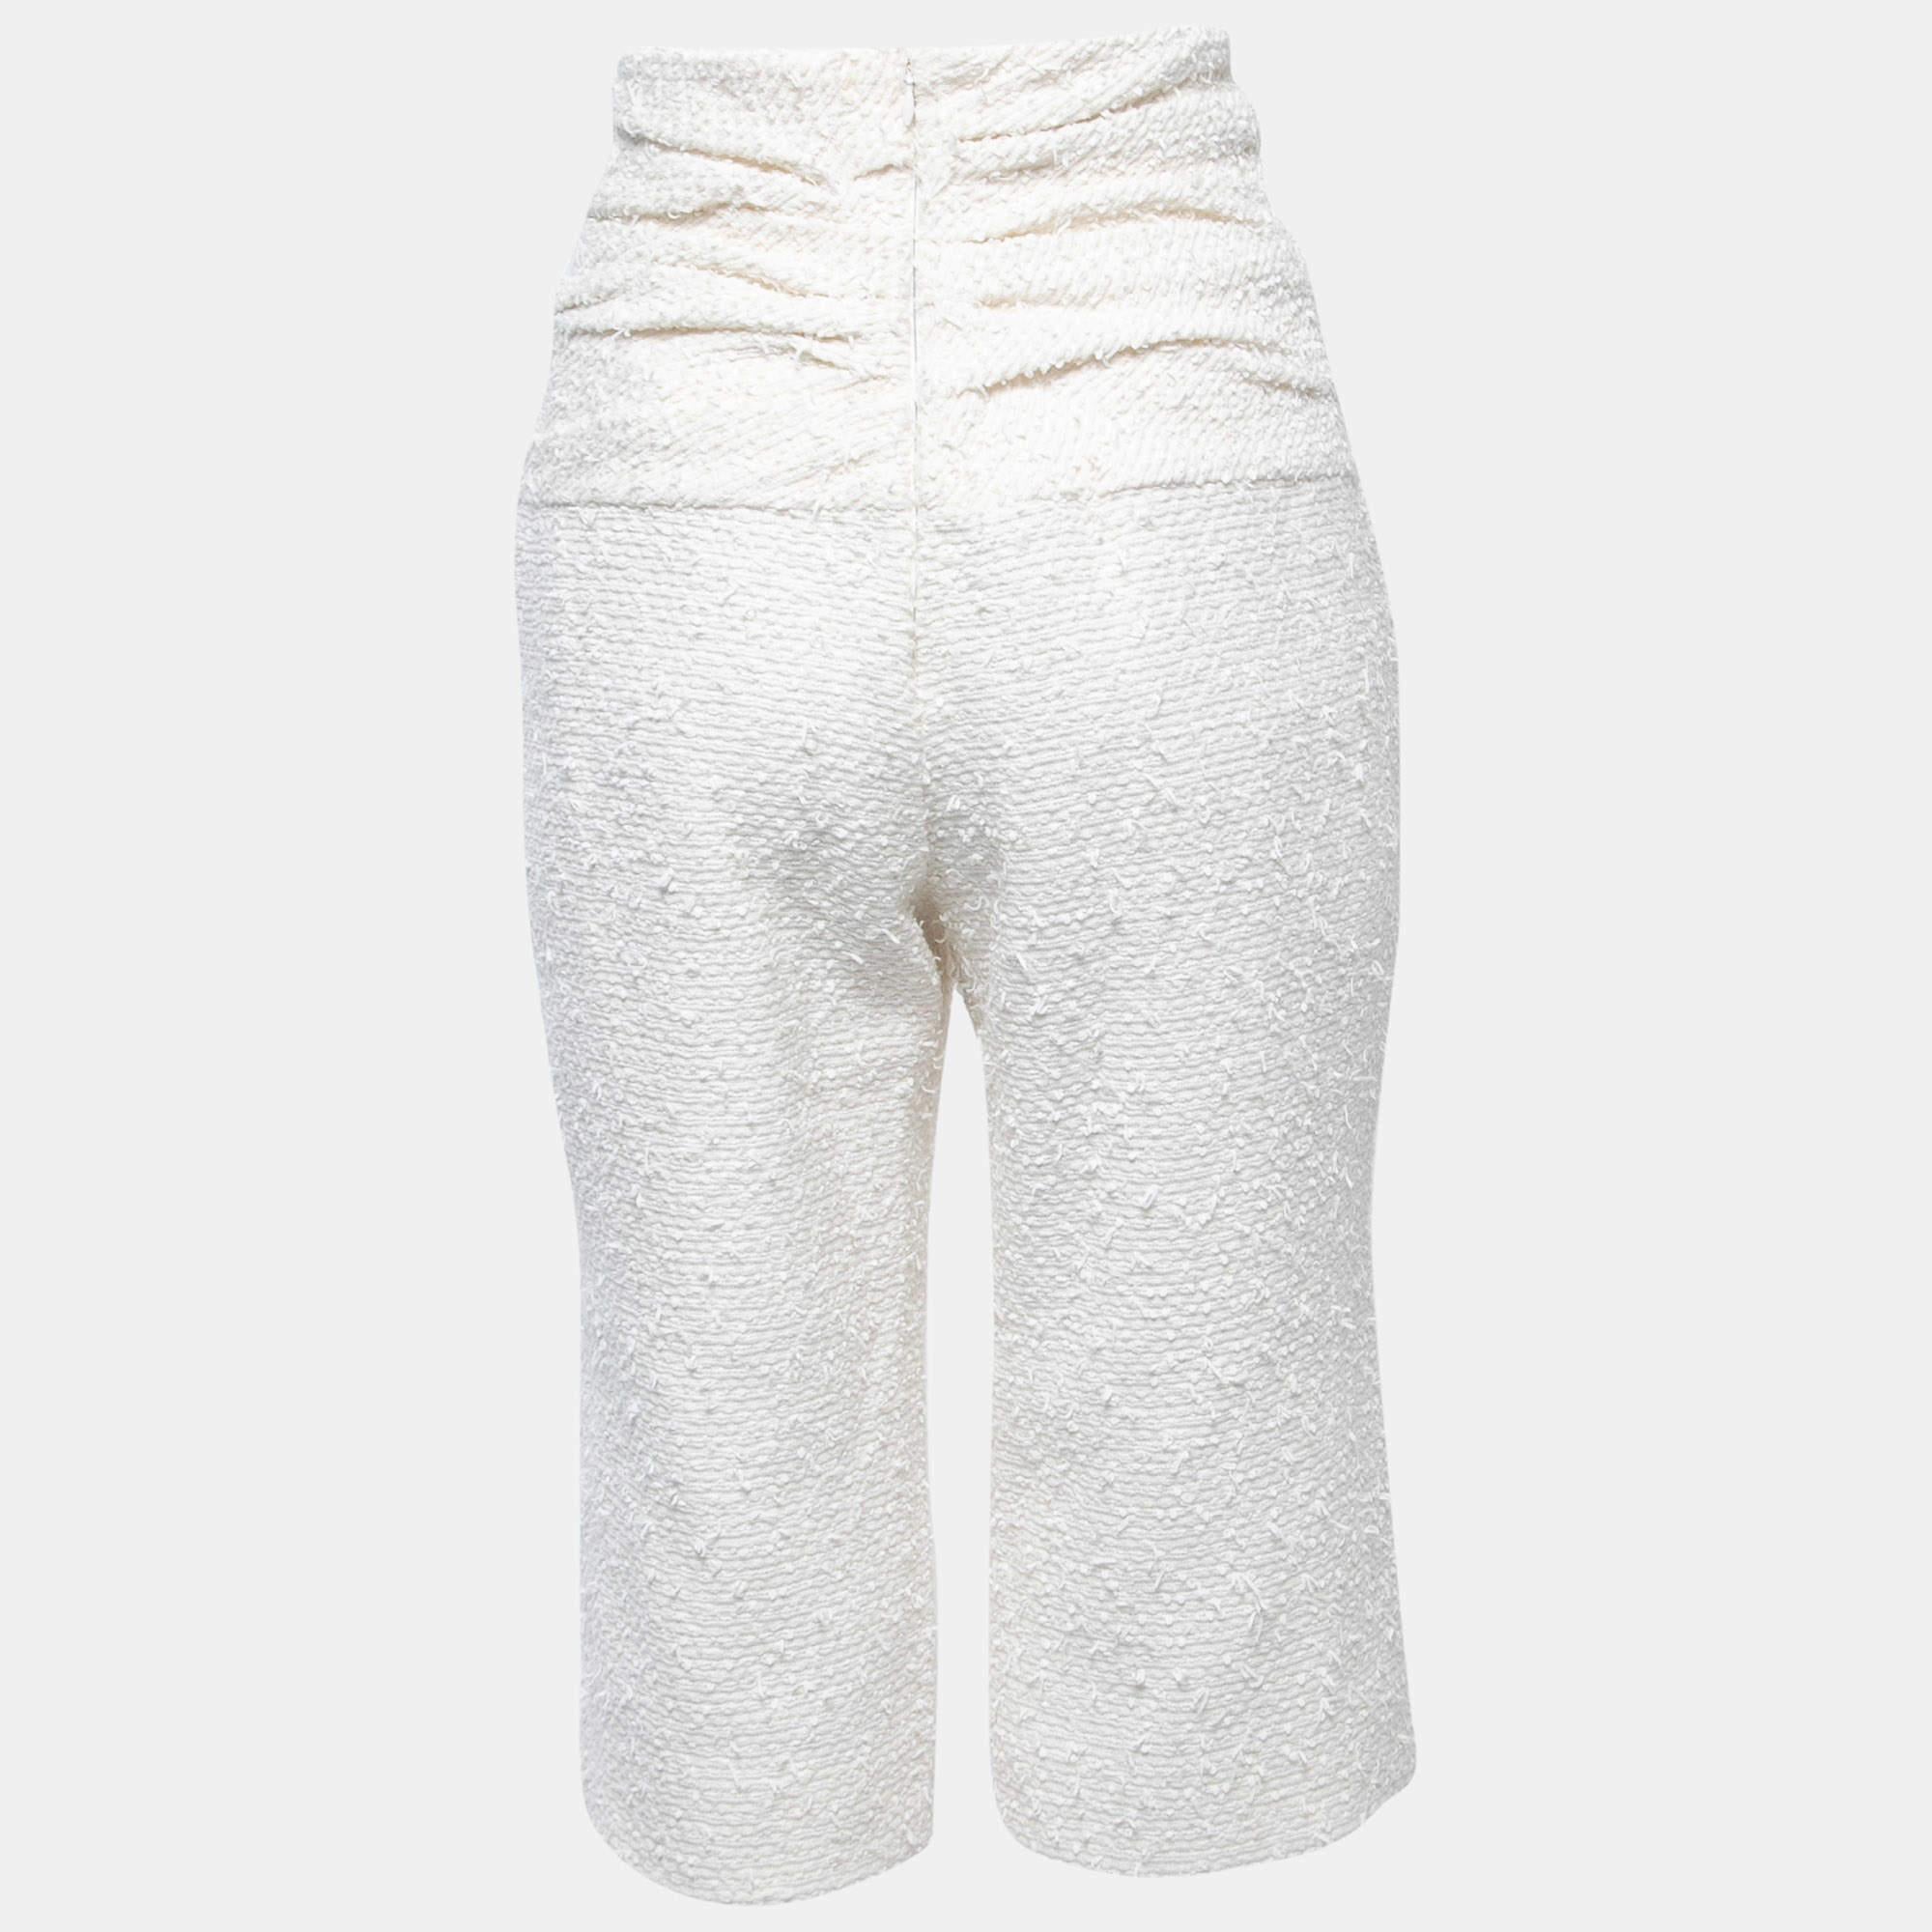 Chanel pants are a luxurious fashion statement. Crafted from high-quality white tweed fabric, they feature a flattering slim fit, a mid-calf length, and iconic Chanel logo buttons. These pants exude timeless elegance, making them a versatile